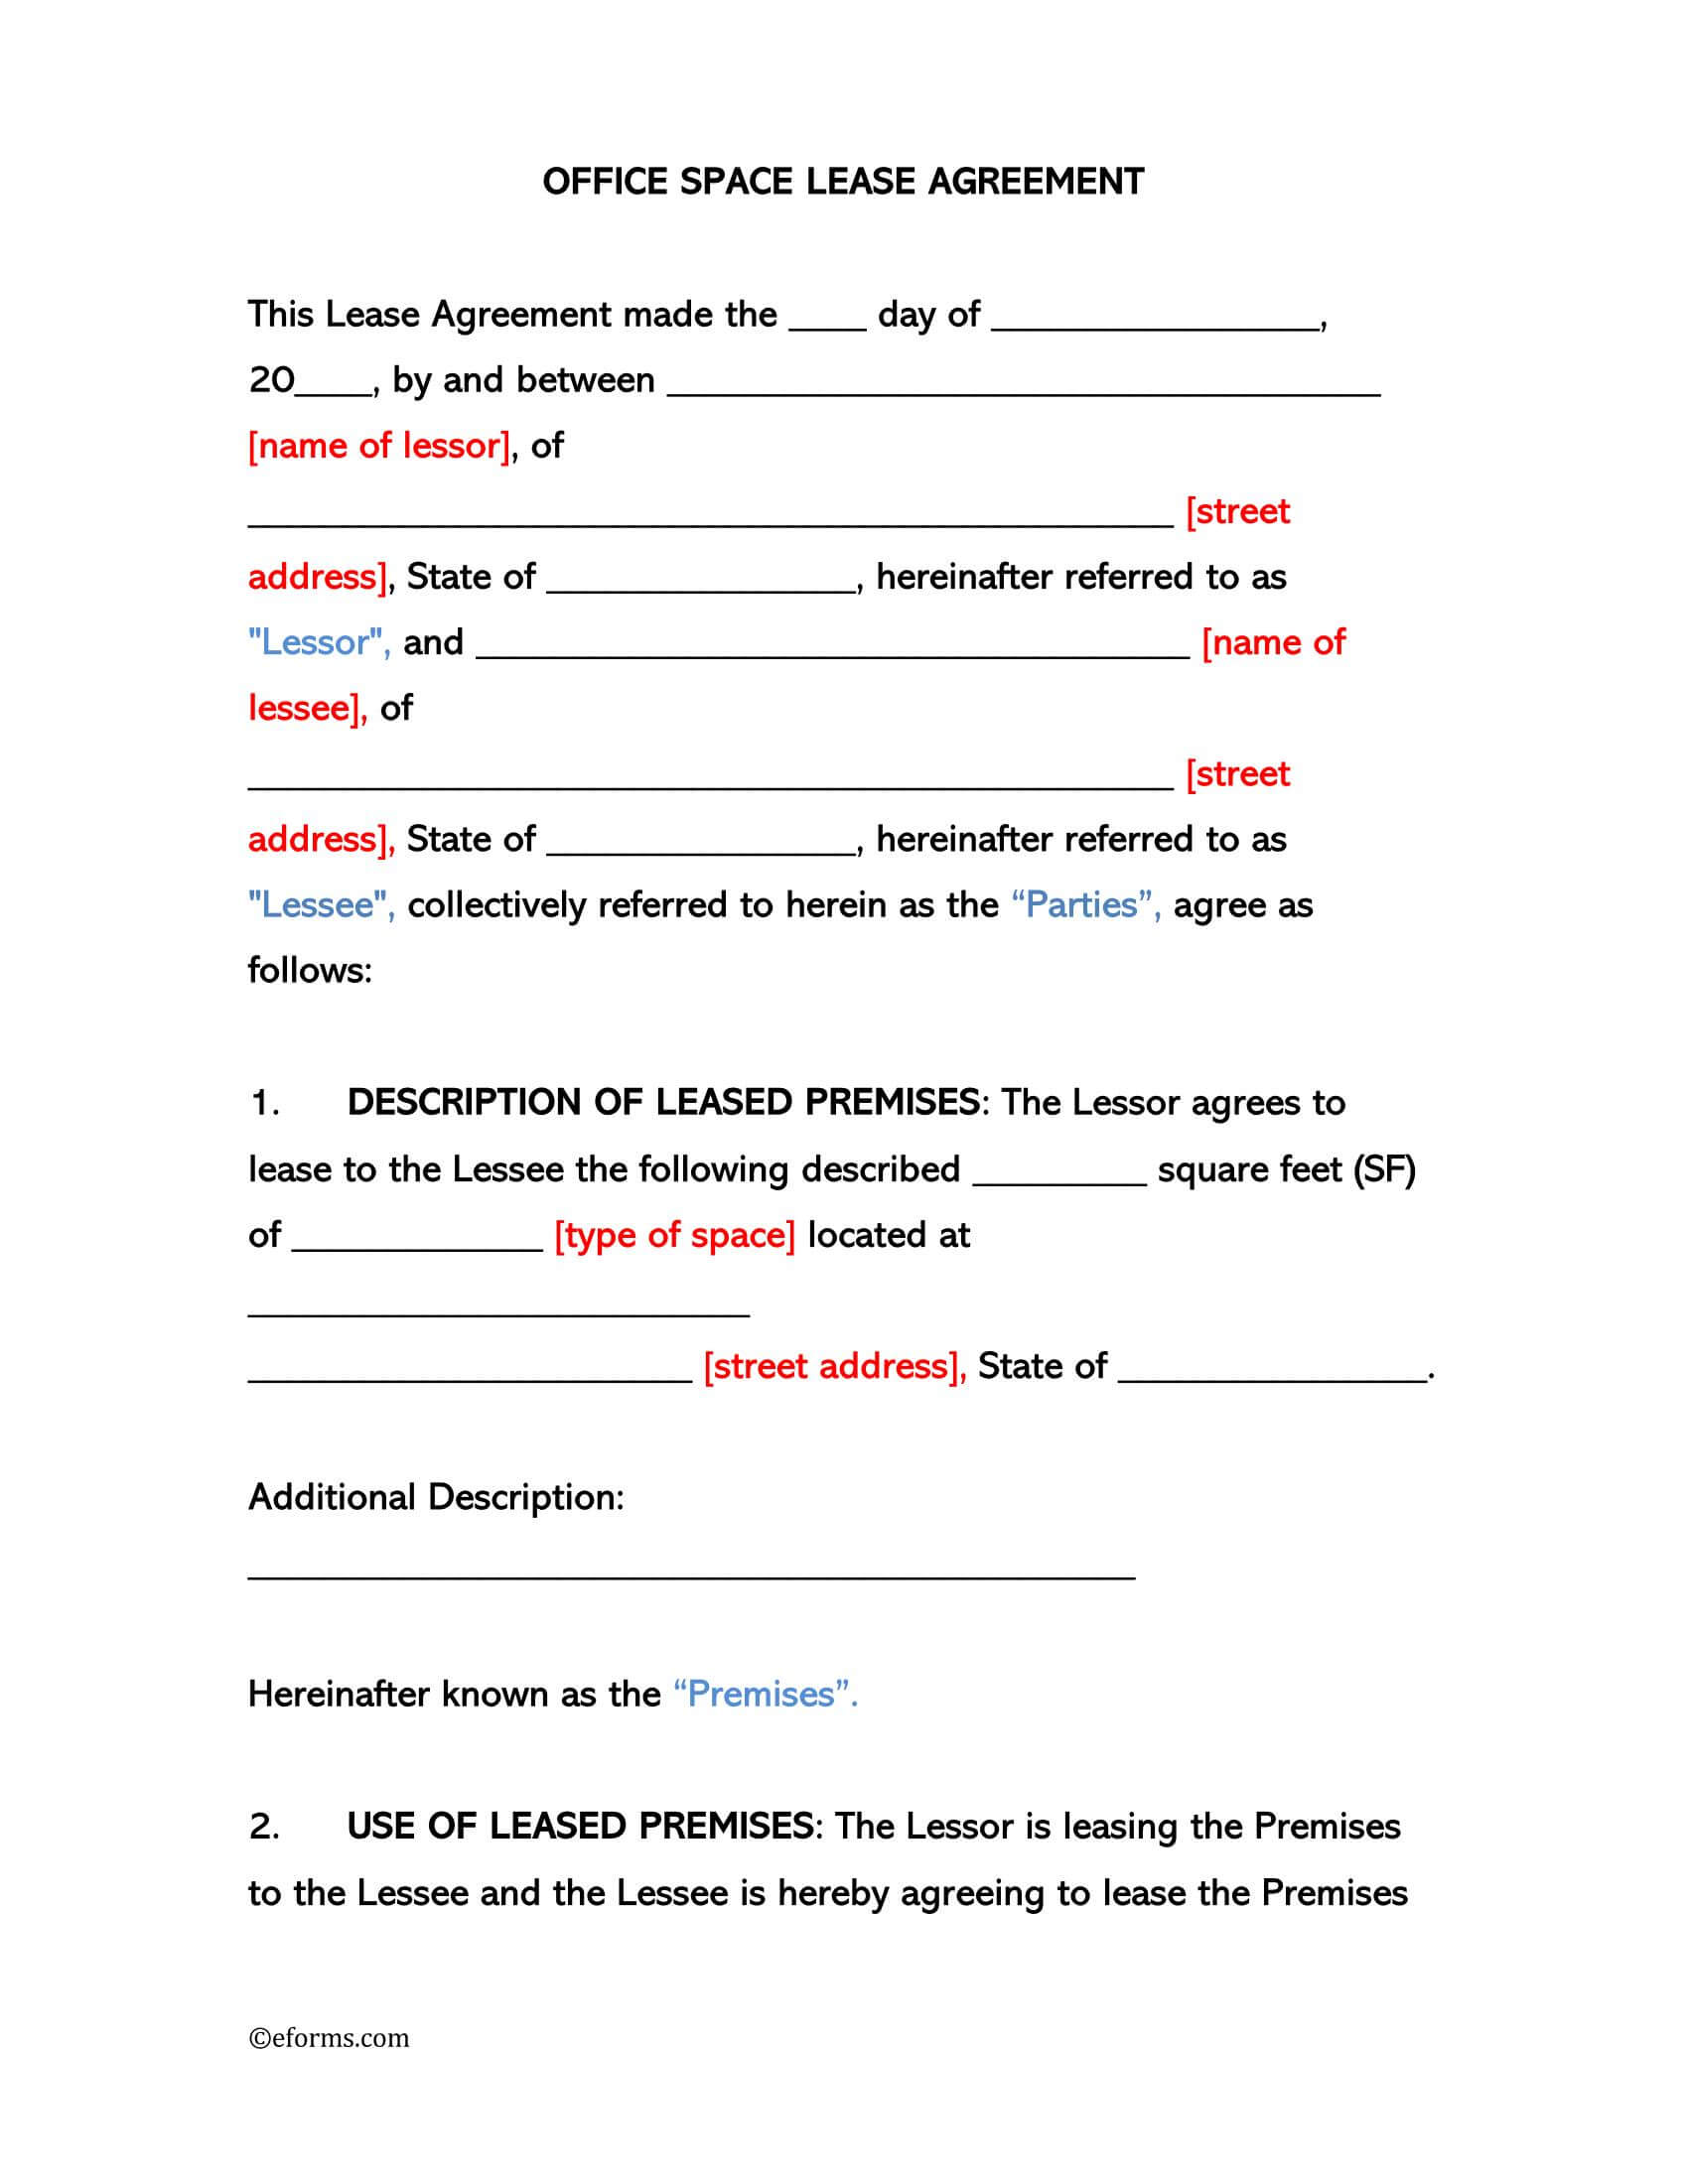 Commercial Office Space Lease Agreement